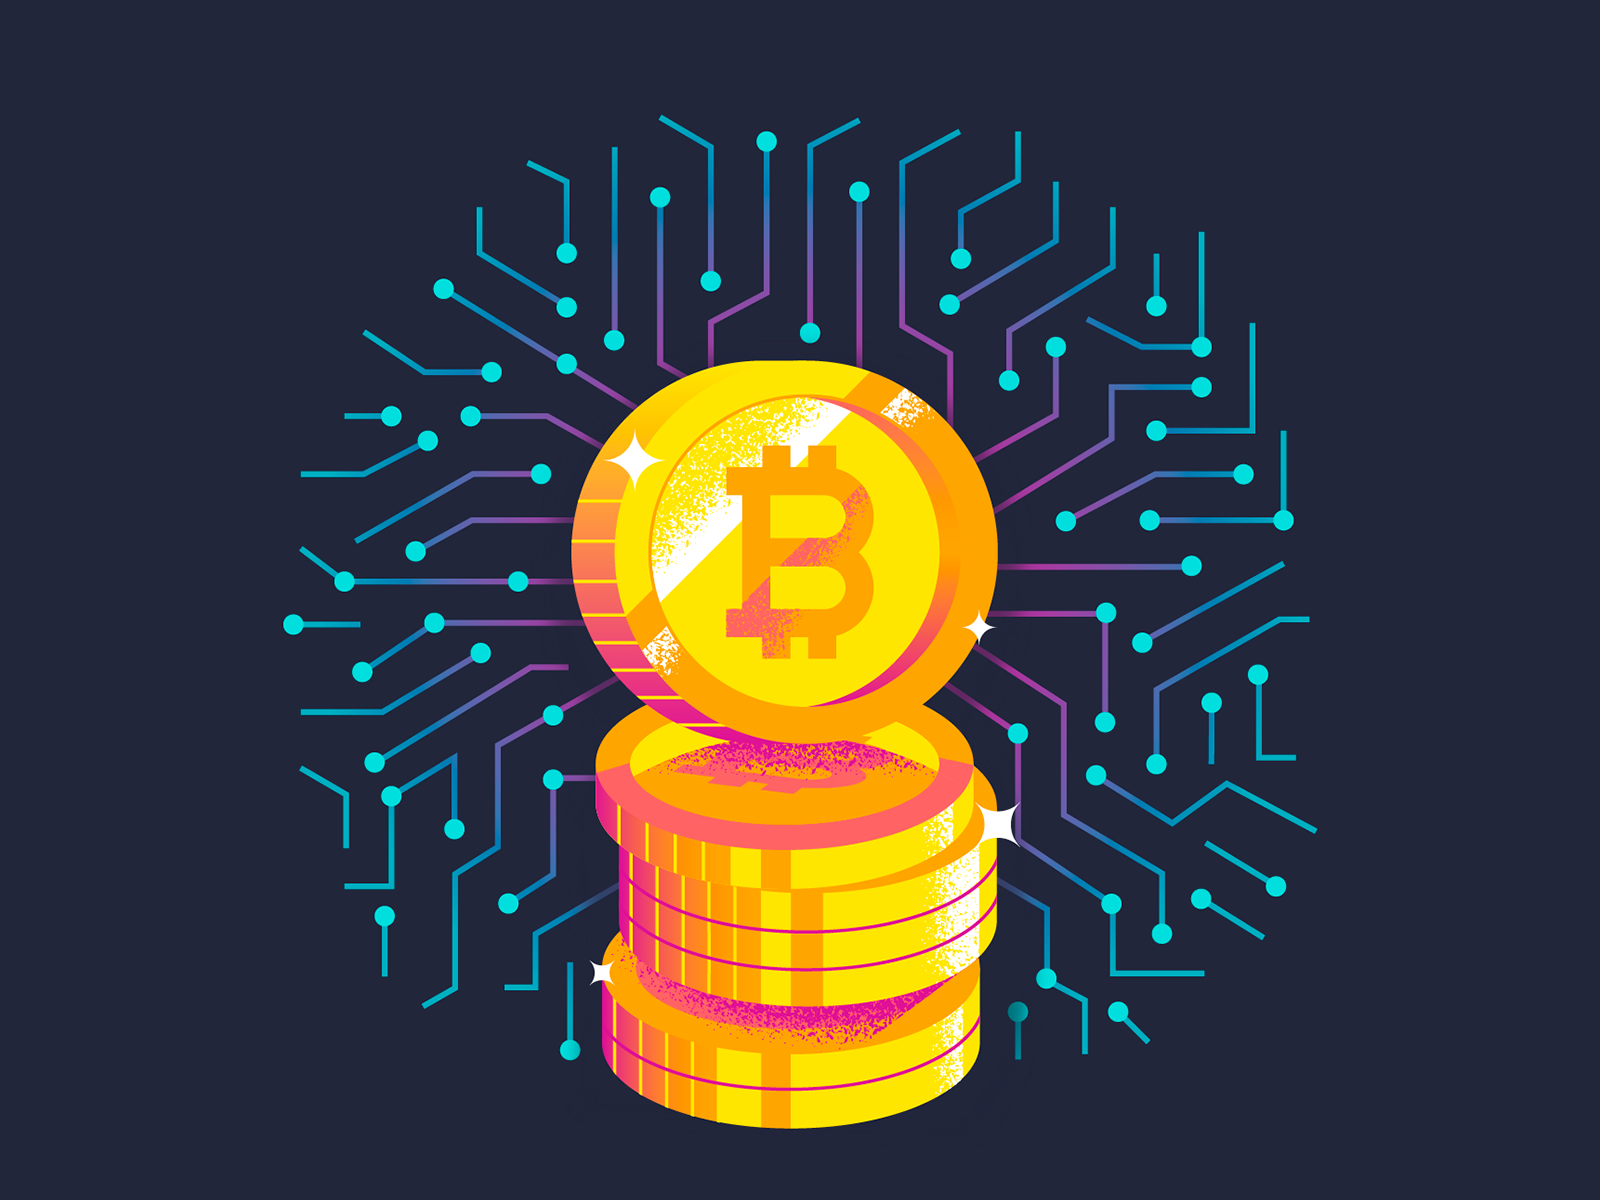 Bitcoin tech circuit board podcast economy flat illustration flat texture vector illustration cryptocurrency crypto wallet money bitcoin